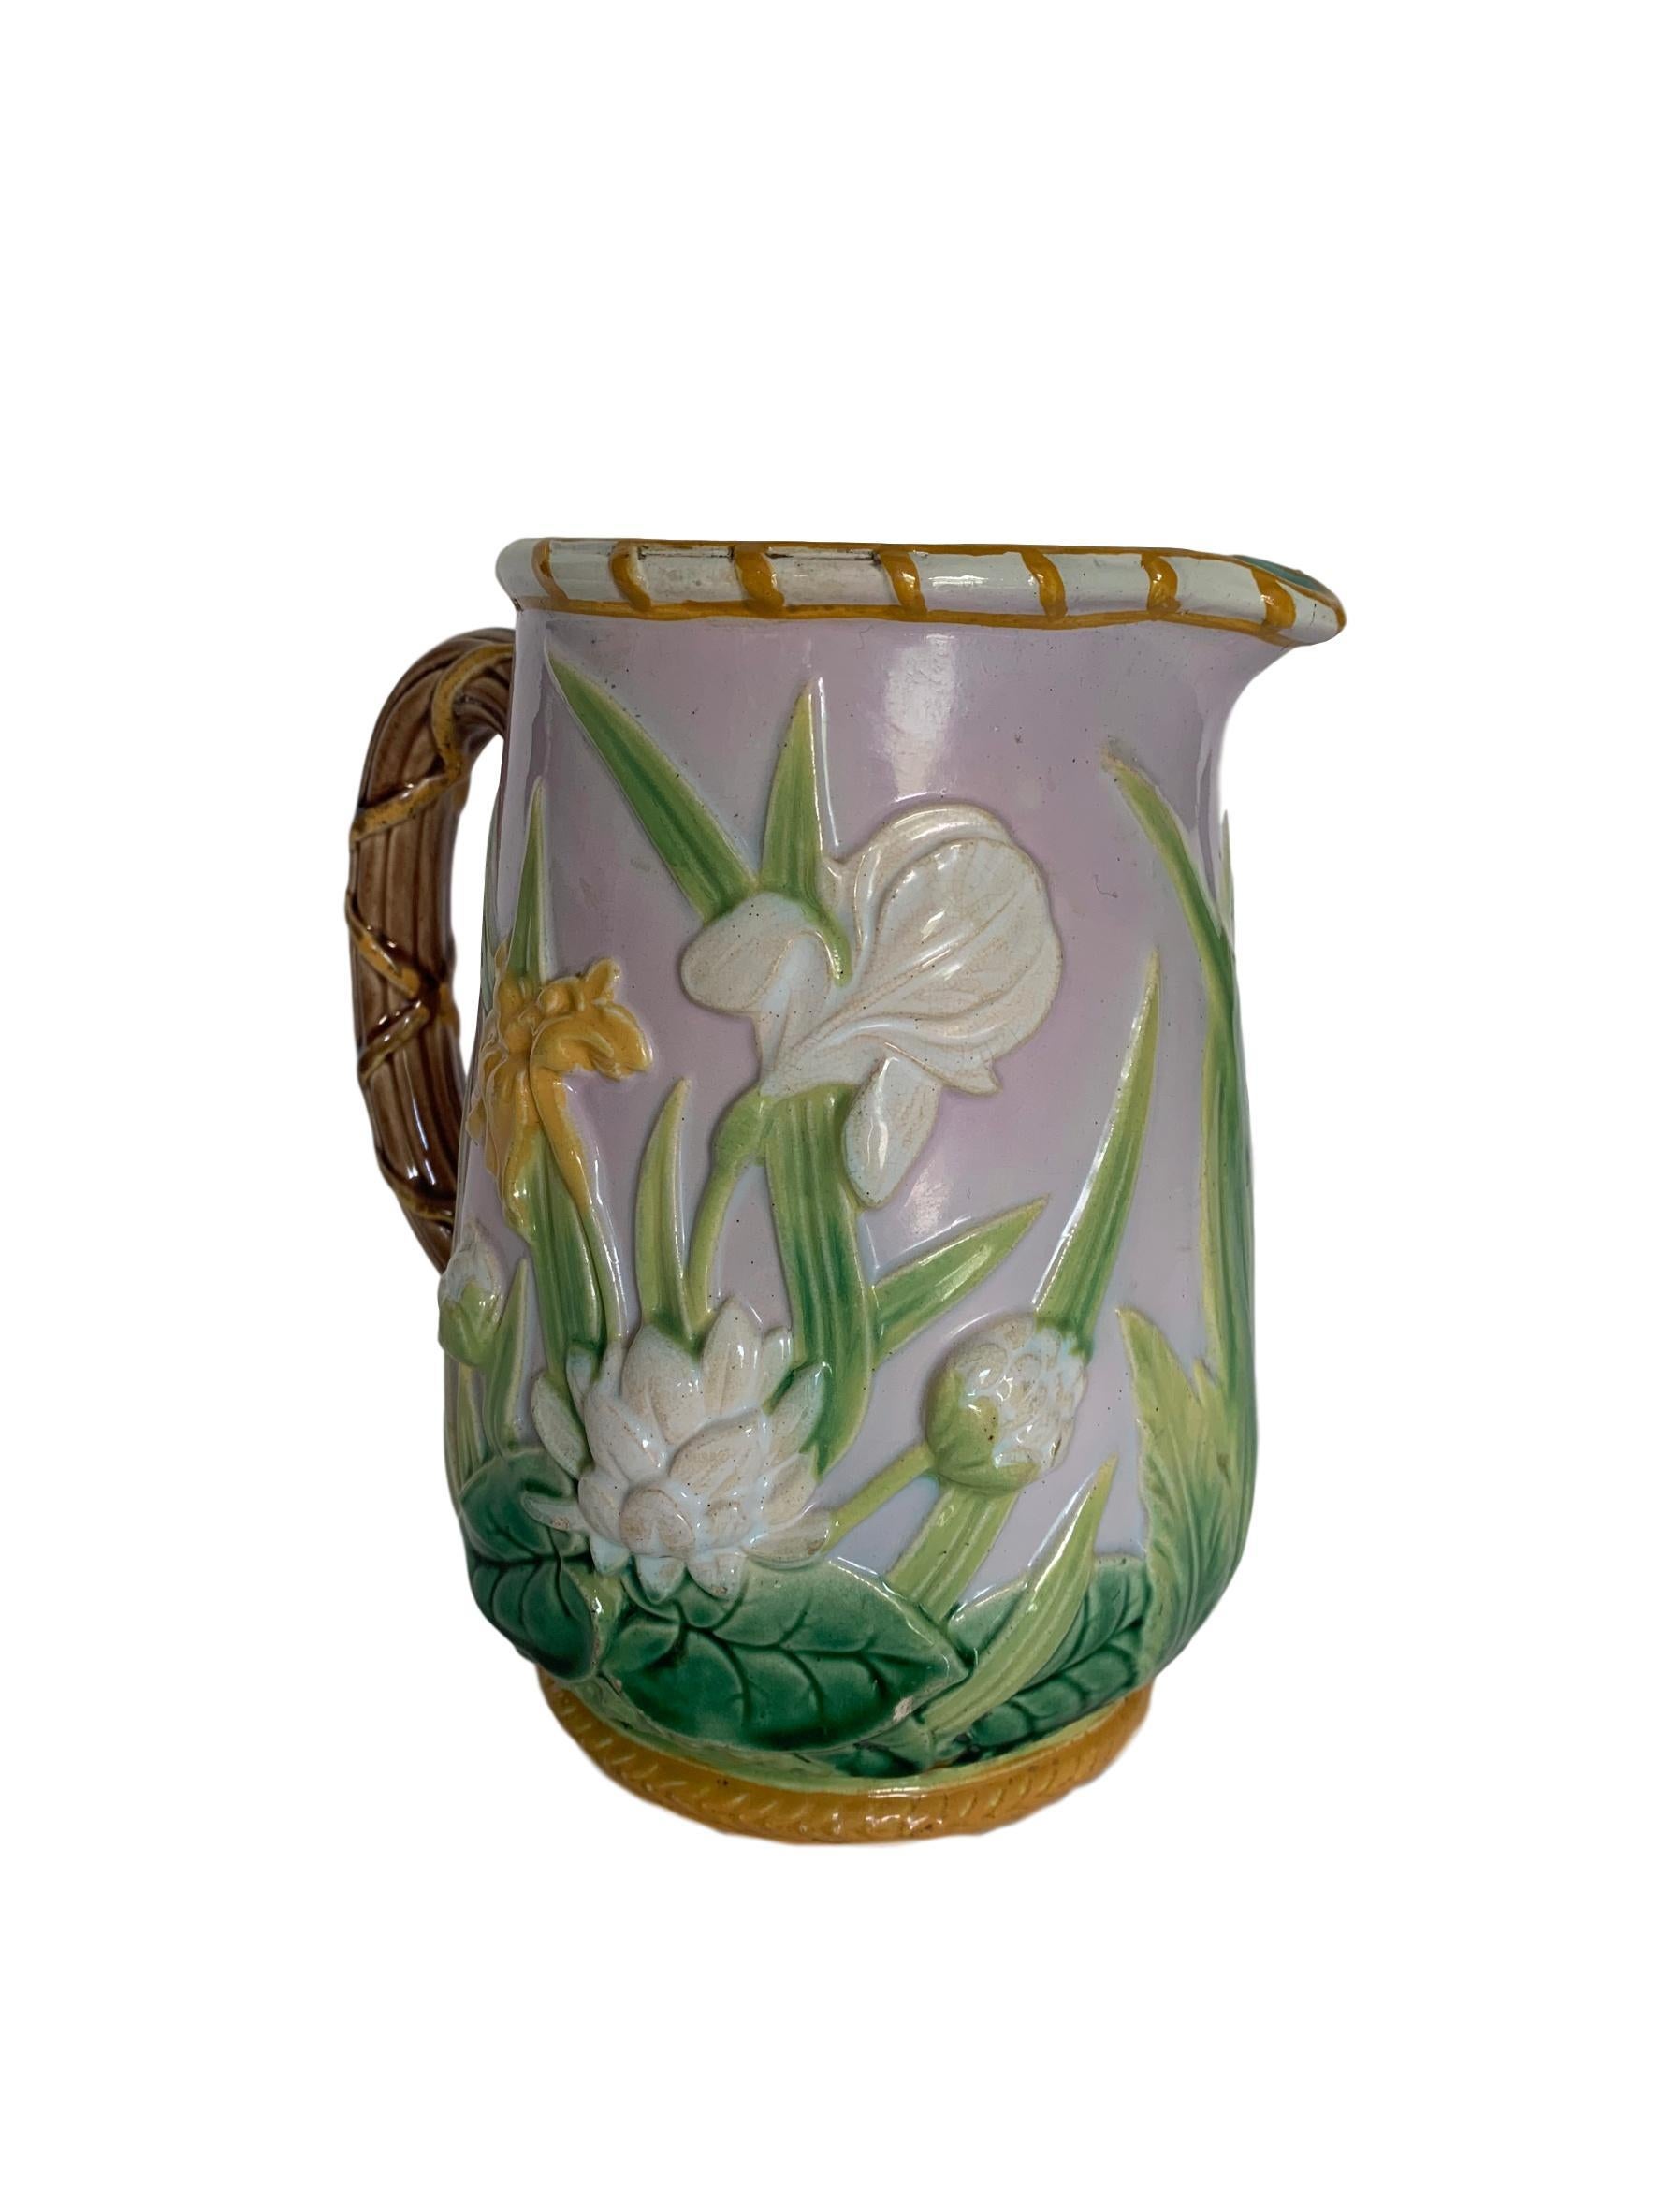 Extremely rare George Jones Majolica Iris Pitcher, England, Victorian, circa 1870s. Professional restoration to the spout.